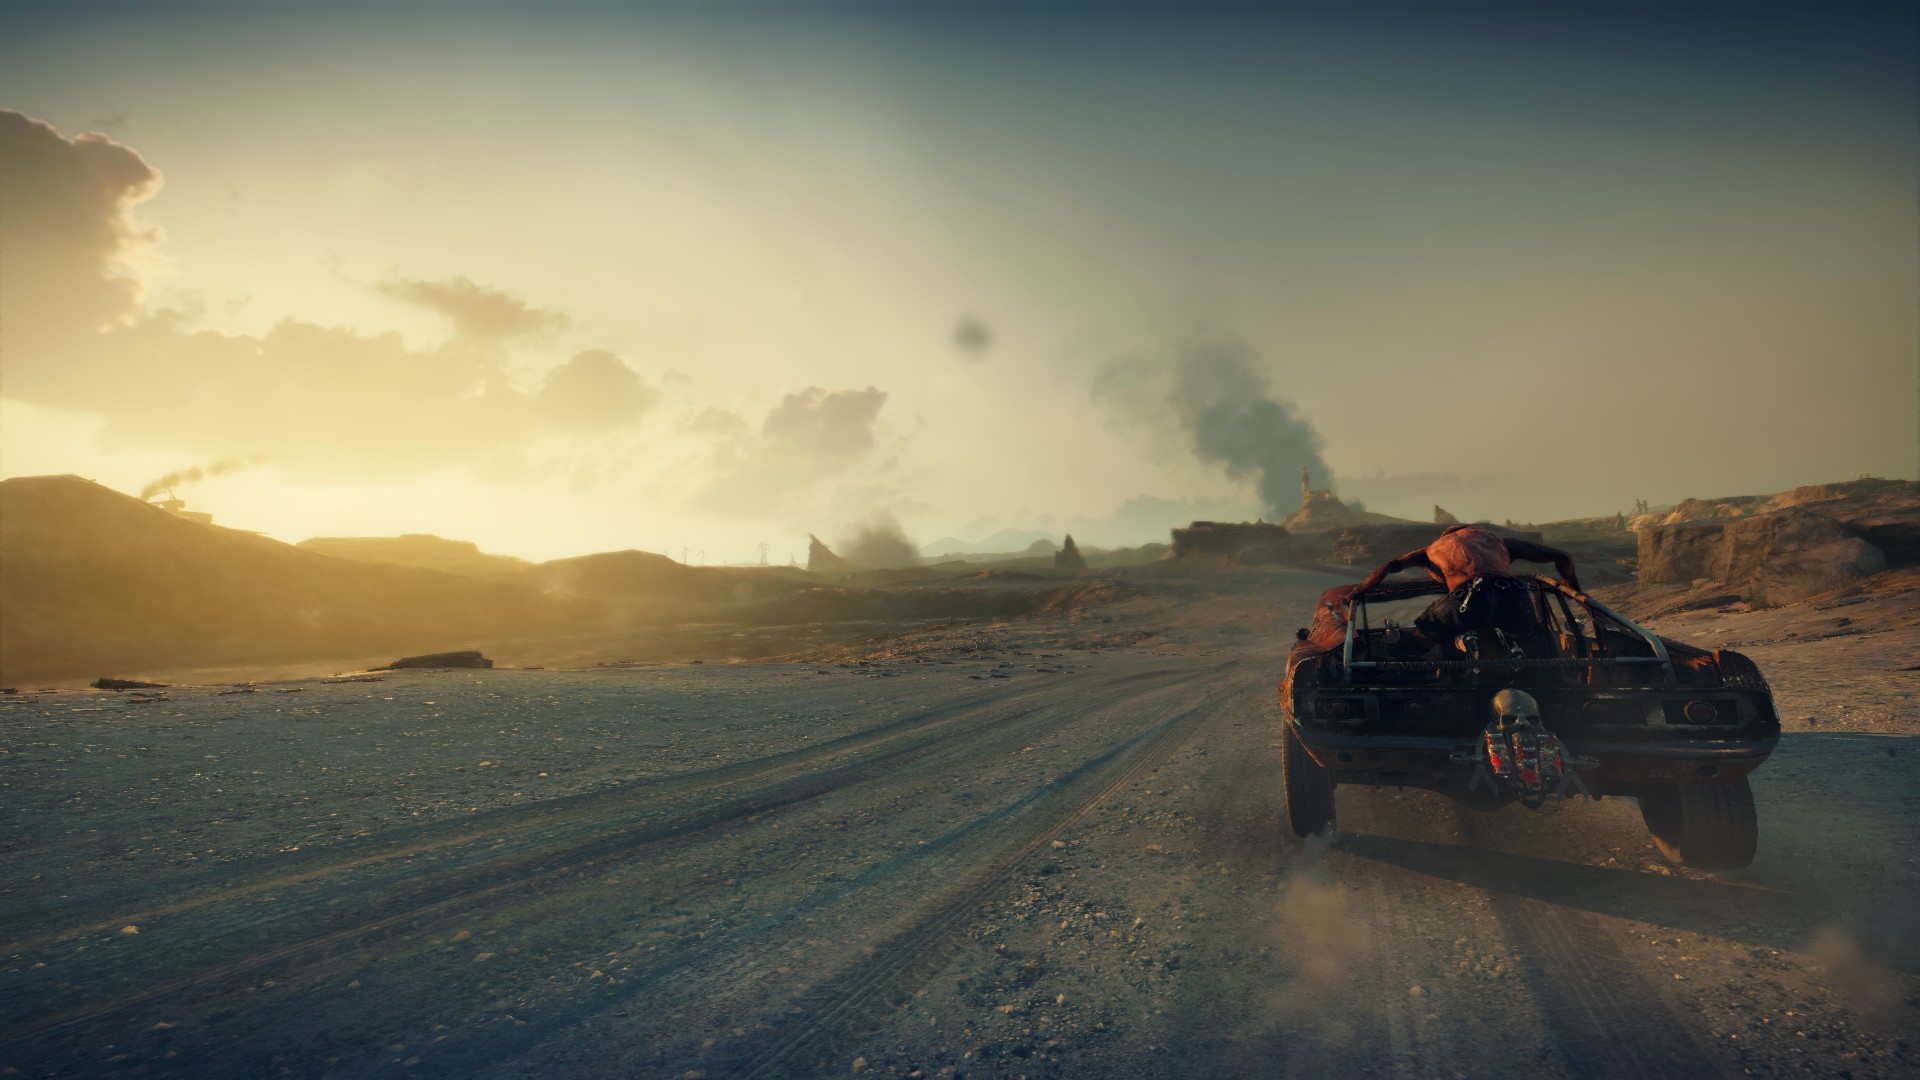 4096x2160 / 4096x2160 desktop wallpaper for mad max - Coolwallpapers.me!